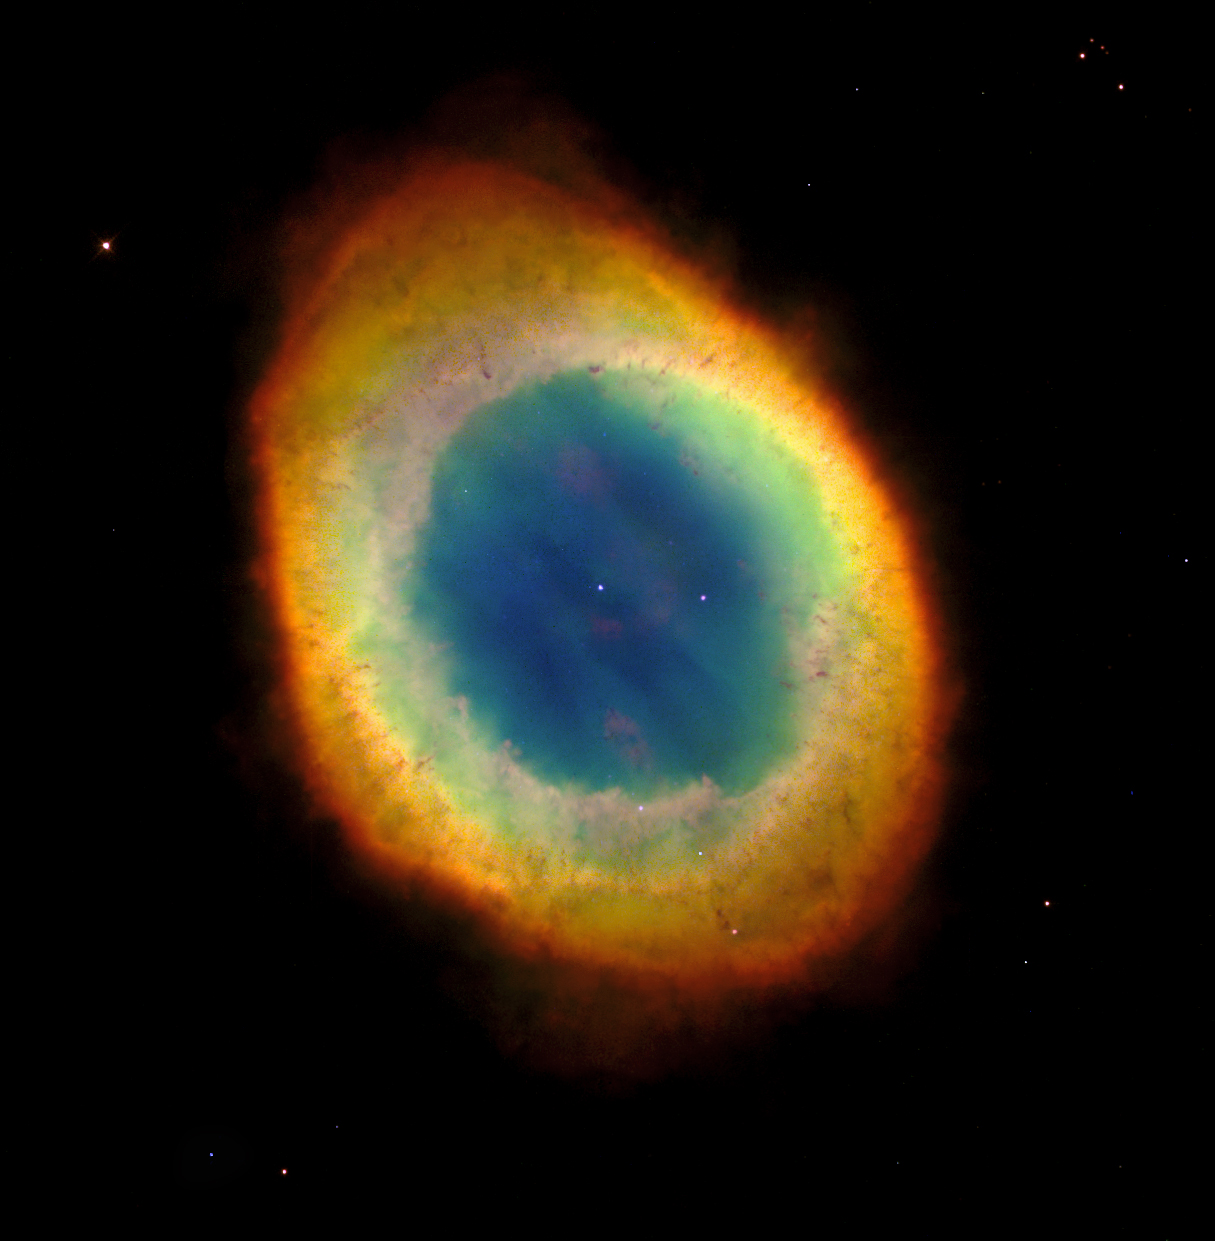 An beautifully colored ring of gas and dust. The ring is slightly elongated/egg-shaped. The center of the ring is blue with two stars visible inside of it (one directly in the center). Beyond the blue center are rings of color. First is green, then yellow, orange, and red.